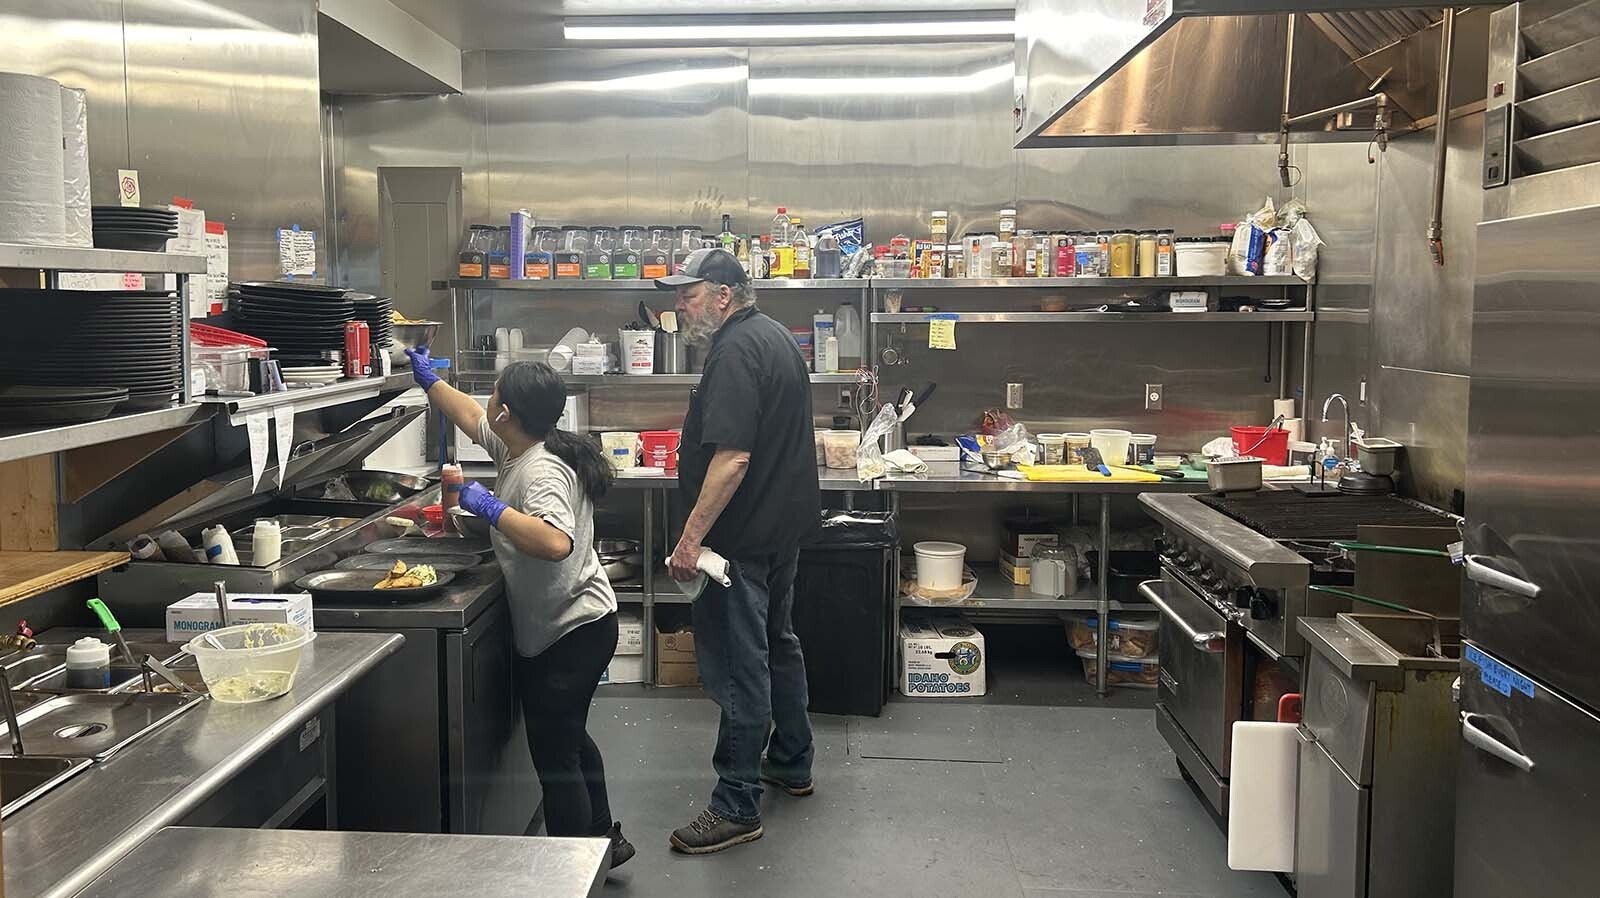 The kitchen at Dad’s Bar and Steakhouse in Thayne is open to anyone who wants to look in and see their meal being prepared.